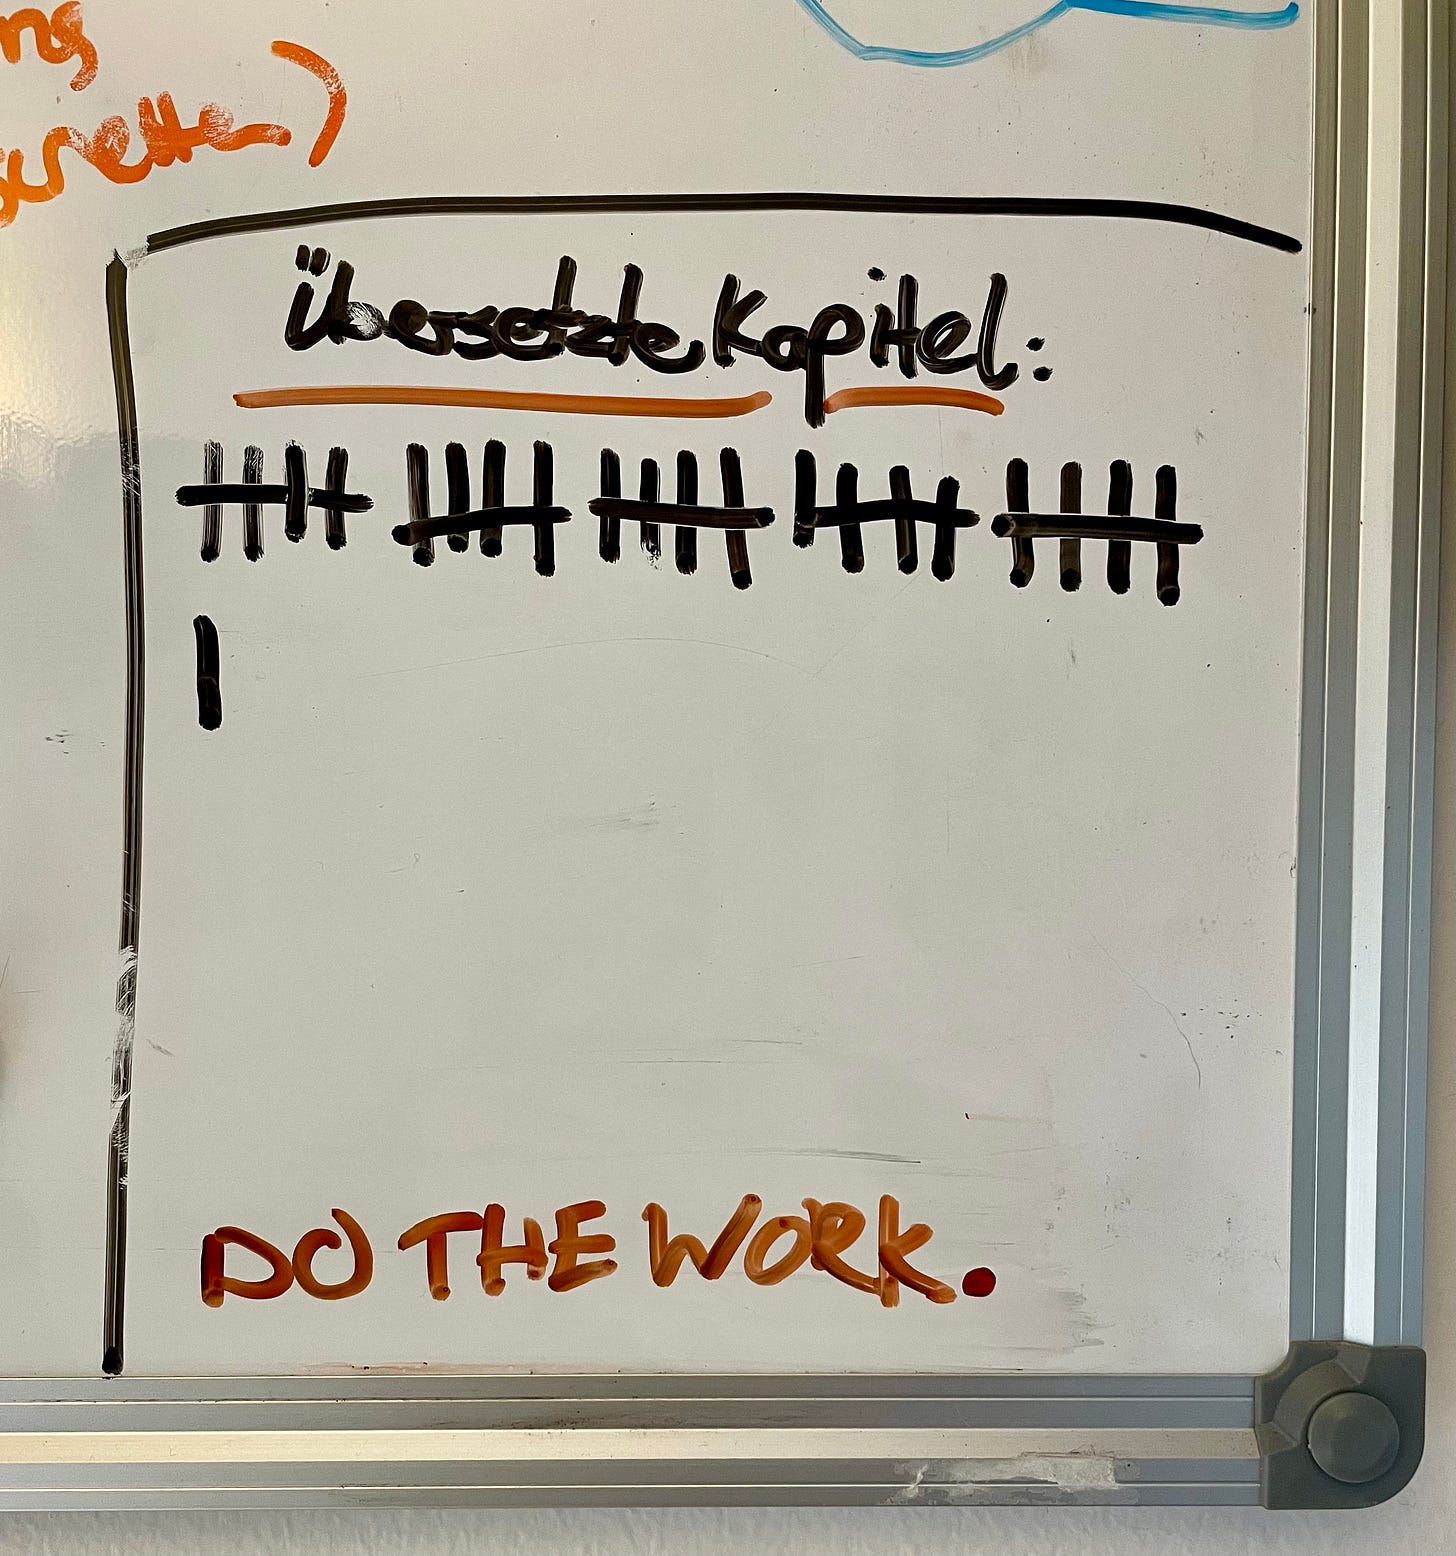 Whiteboard scribble, counting the translated chapters of "Runhundred" and a motivational sentence saying "Do the work!"